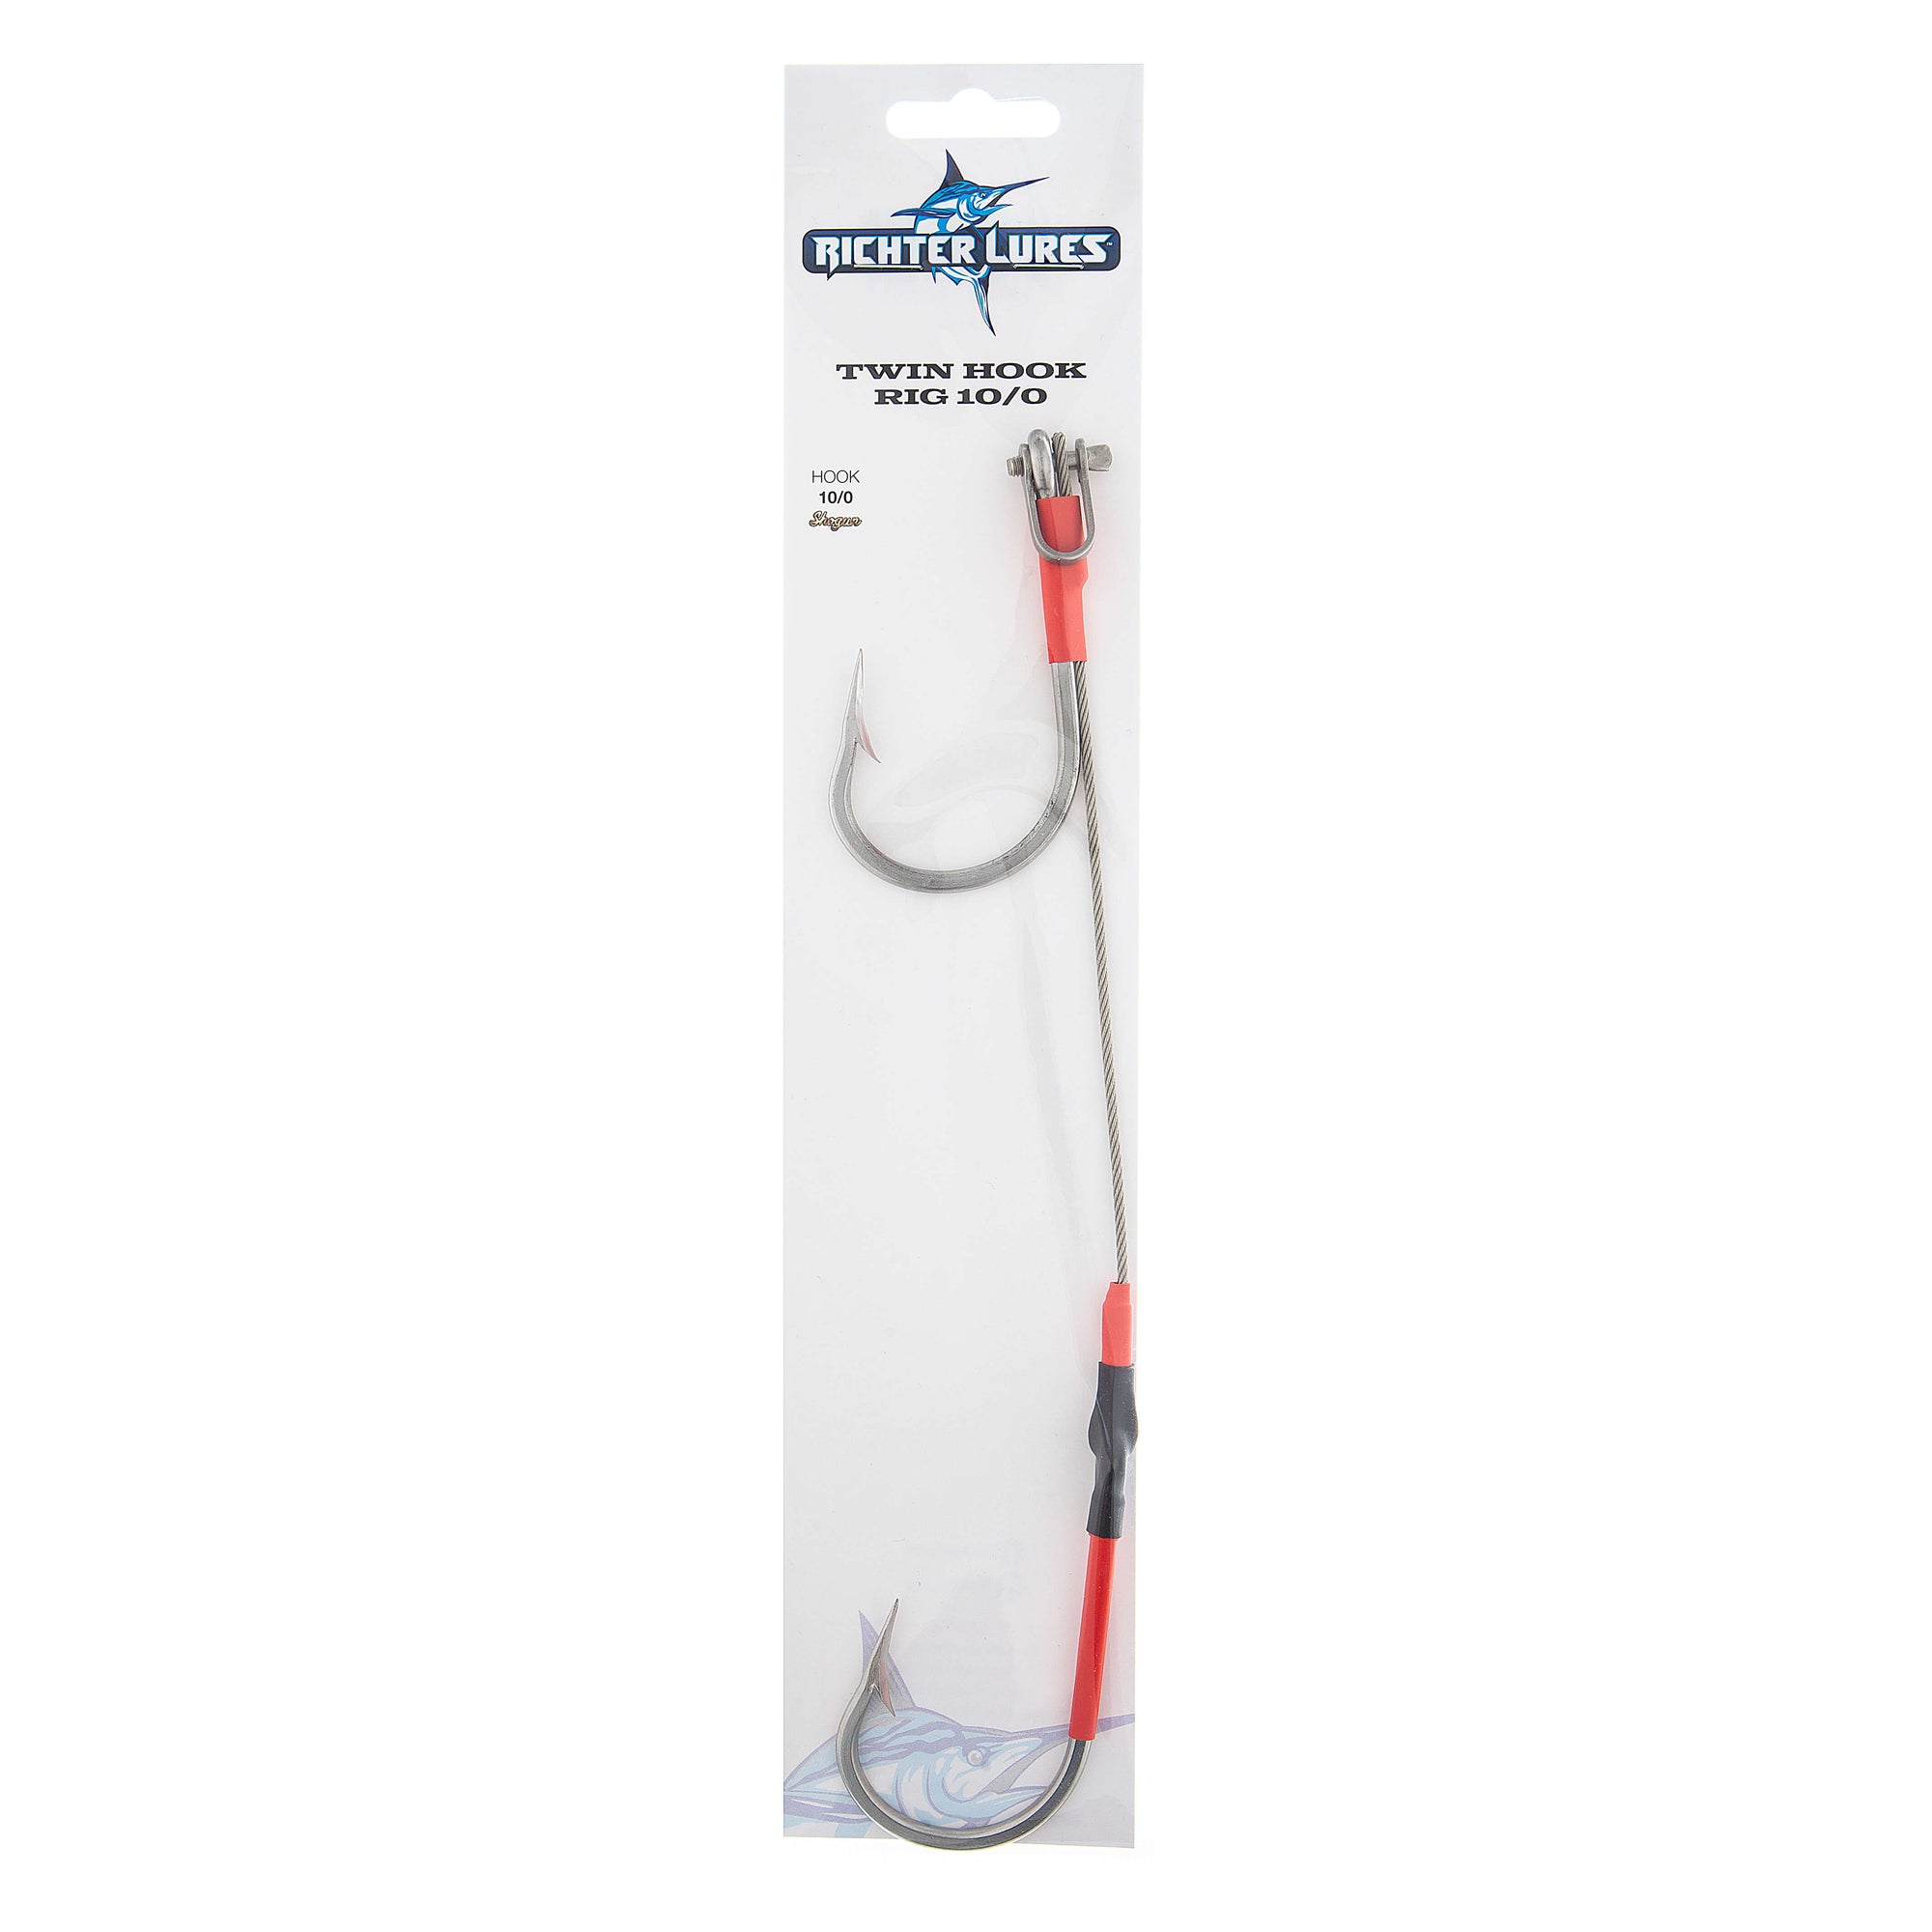 The Complete Single Hook Rig - Richter Lures